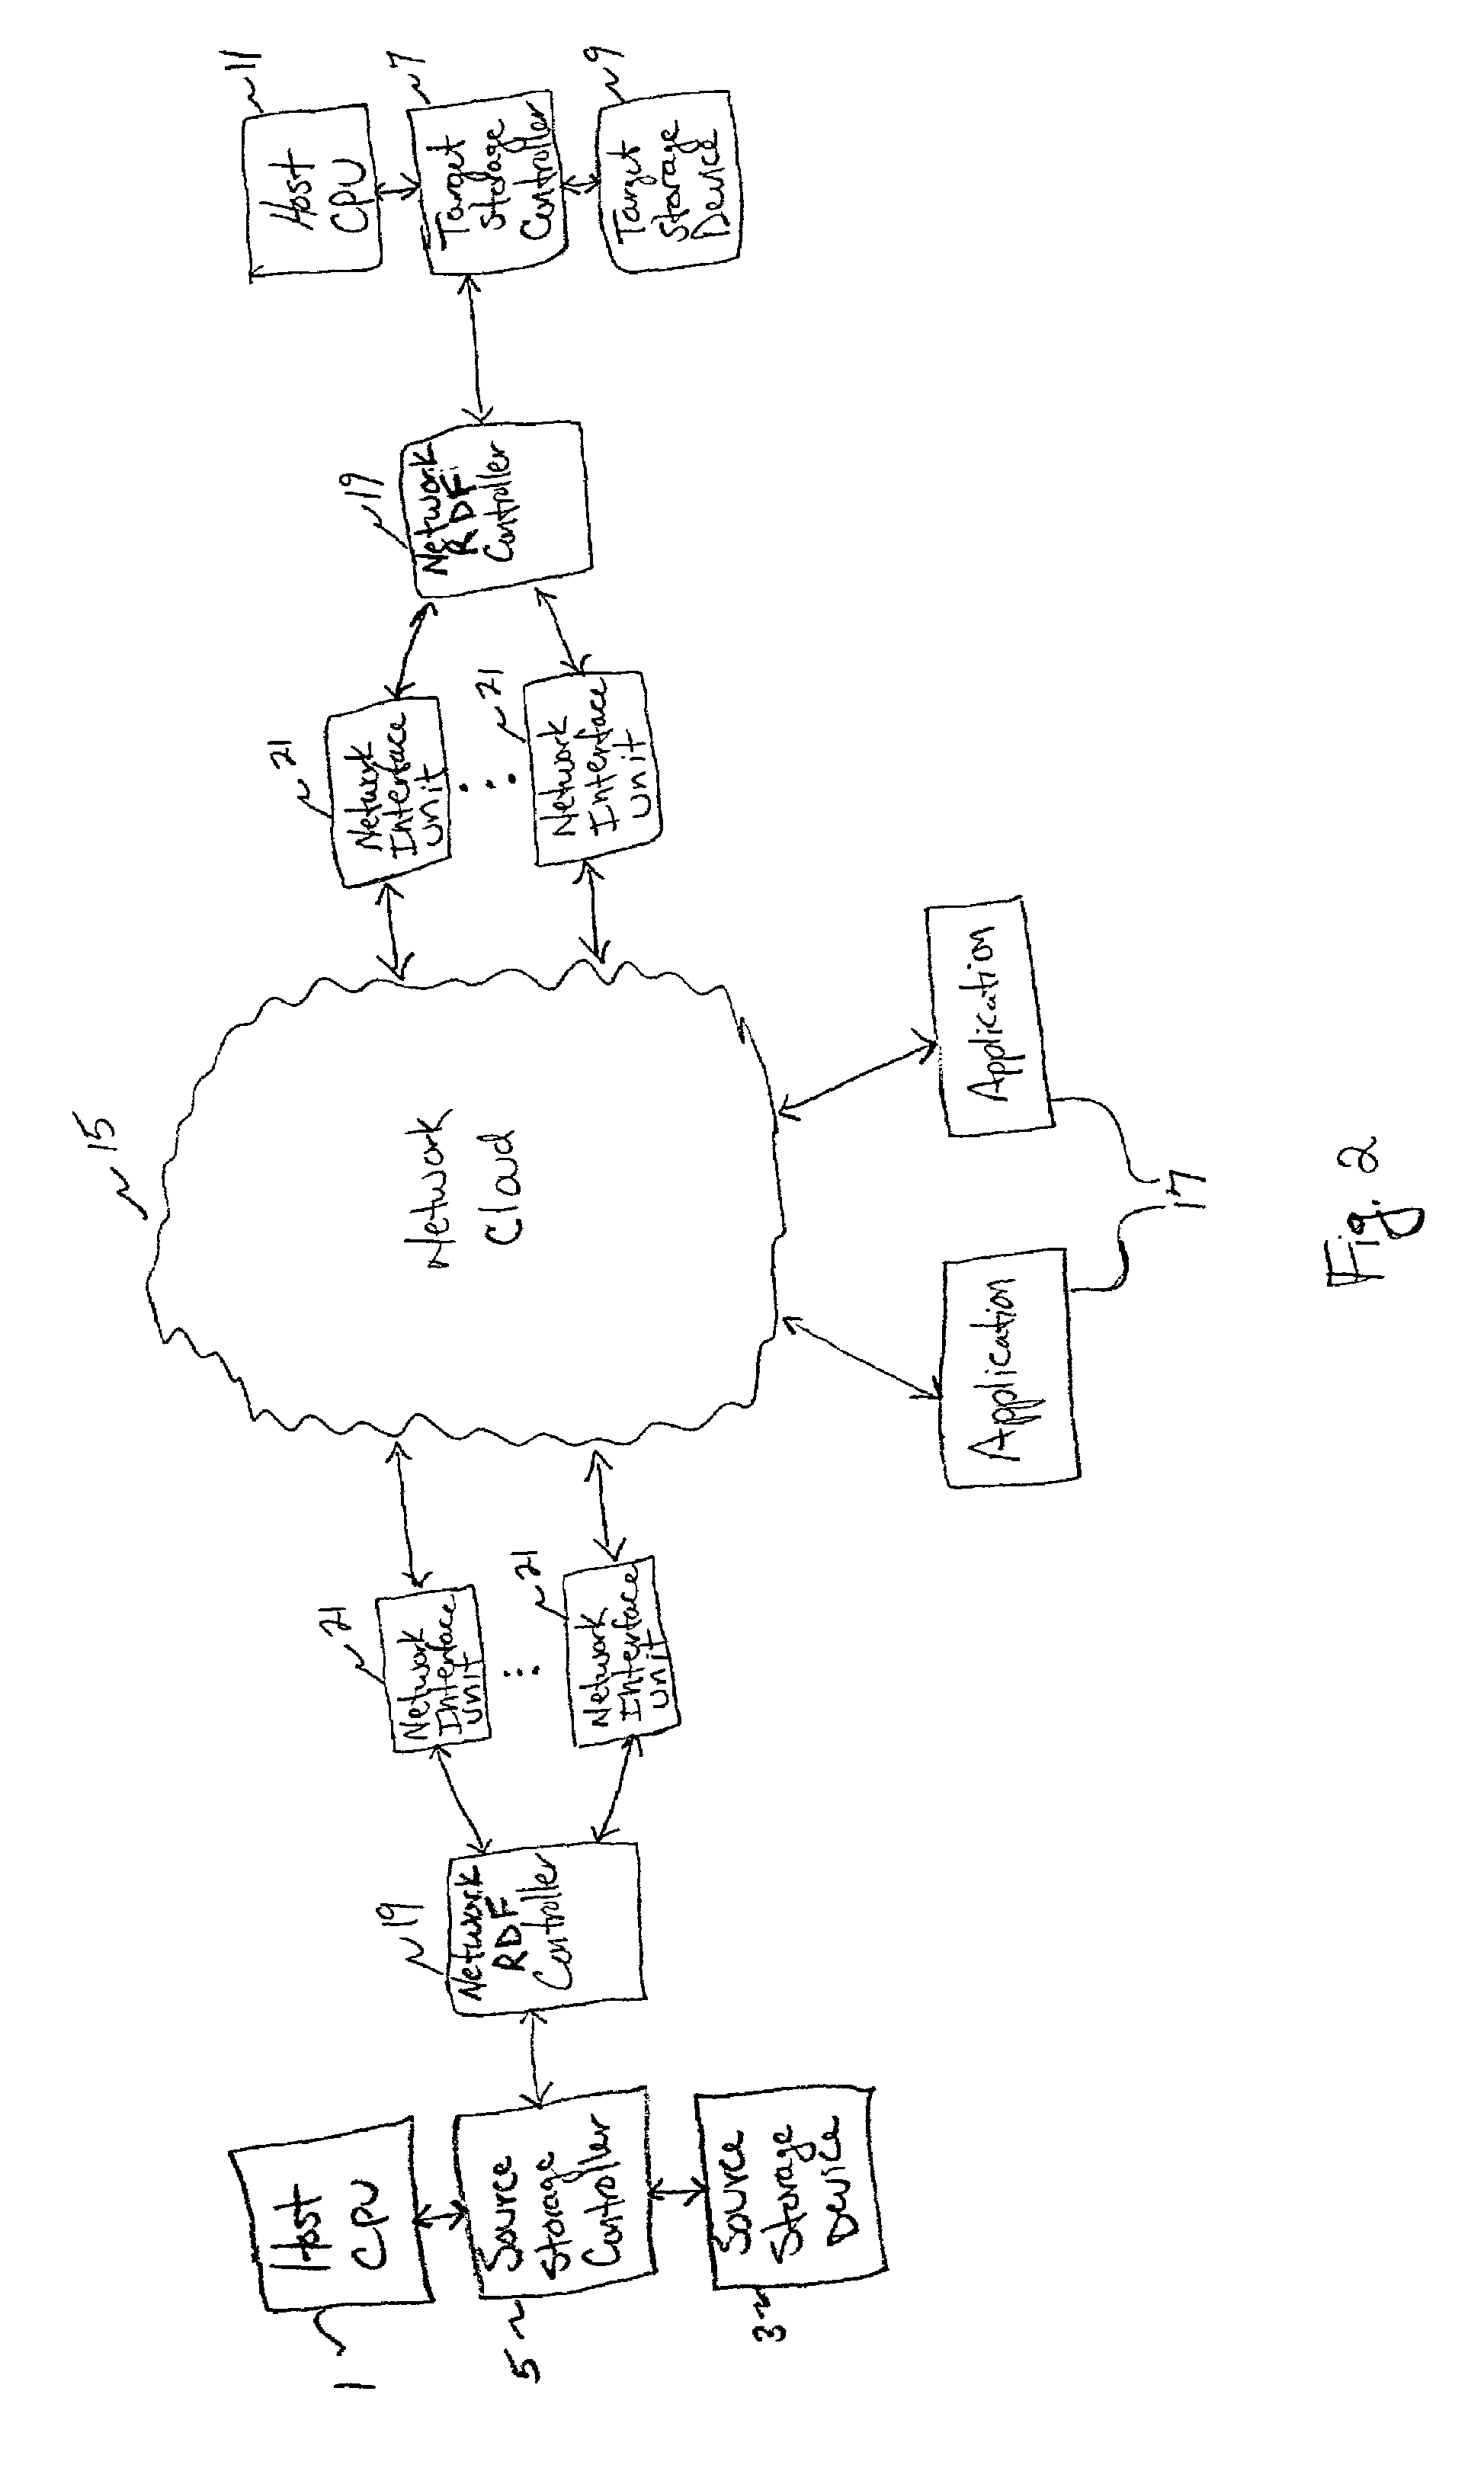 Method and apparatus for implementing a remote mirroring data facility without employing a dedicated leased line to form the link between two remotely disposed storage devices